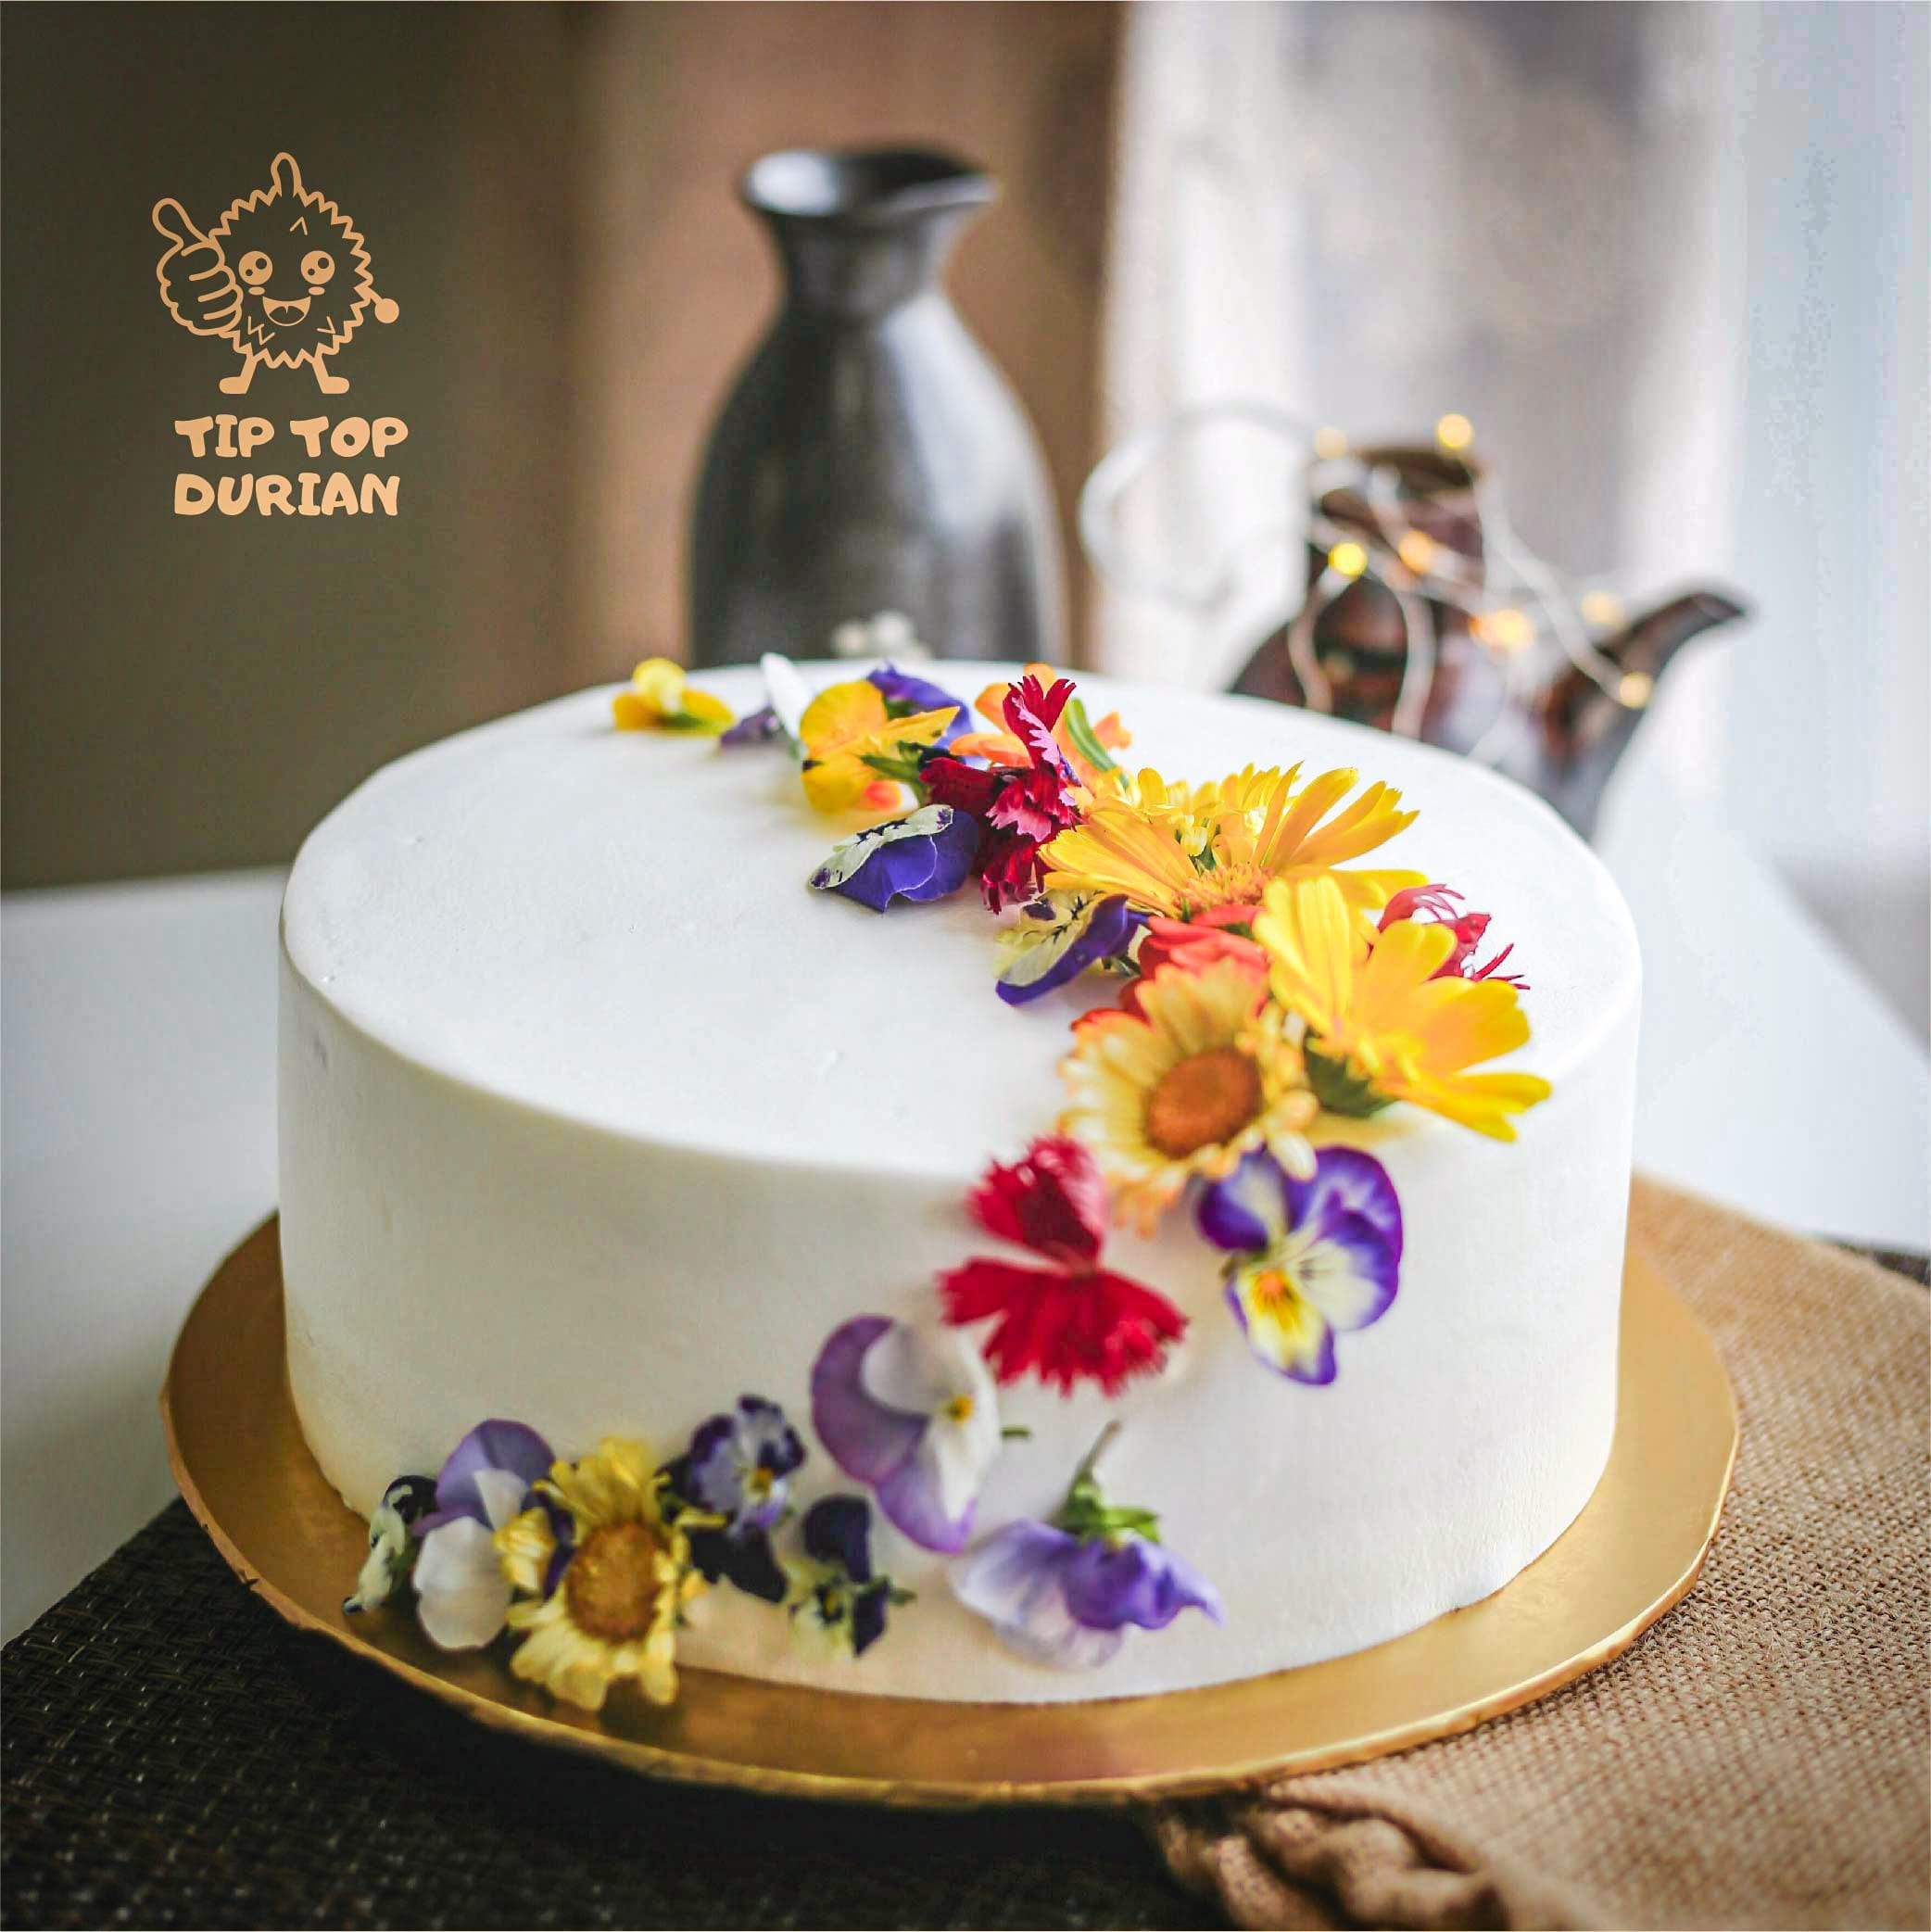 Premium Musang King Durian Mille Crepe Cake 7" | Tip Top Durian Delivery | Malaysia Top Fresh Durian Online Delivery